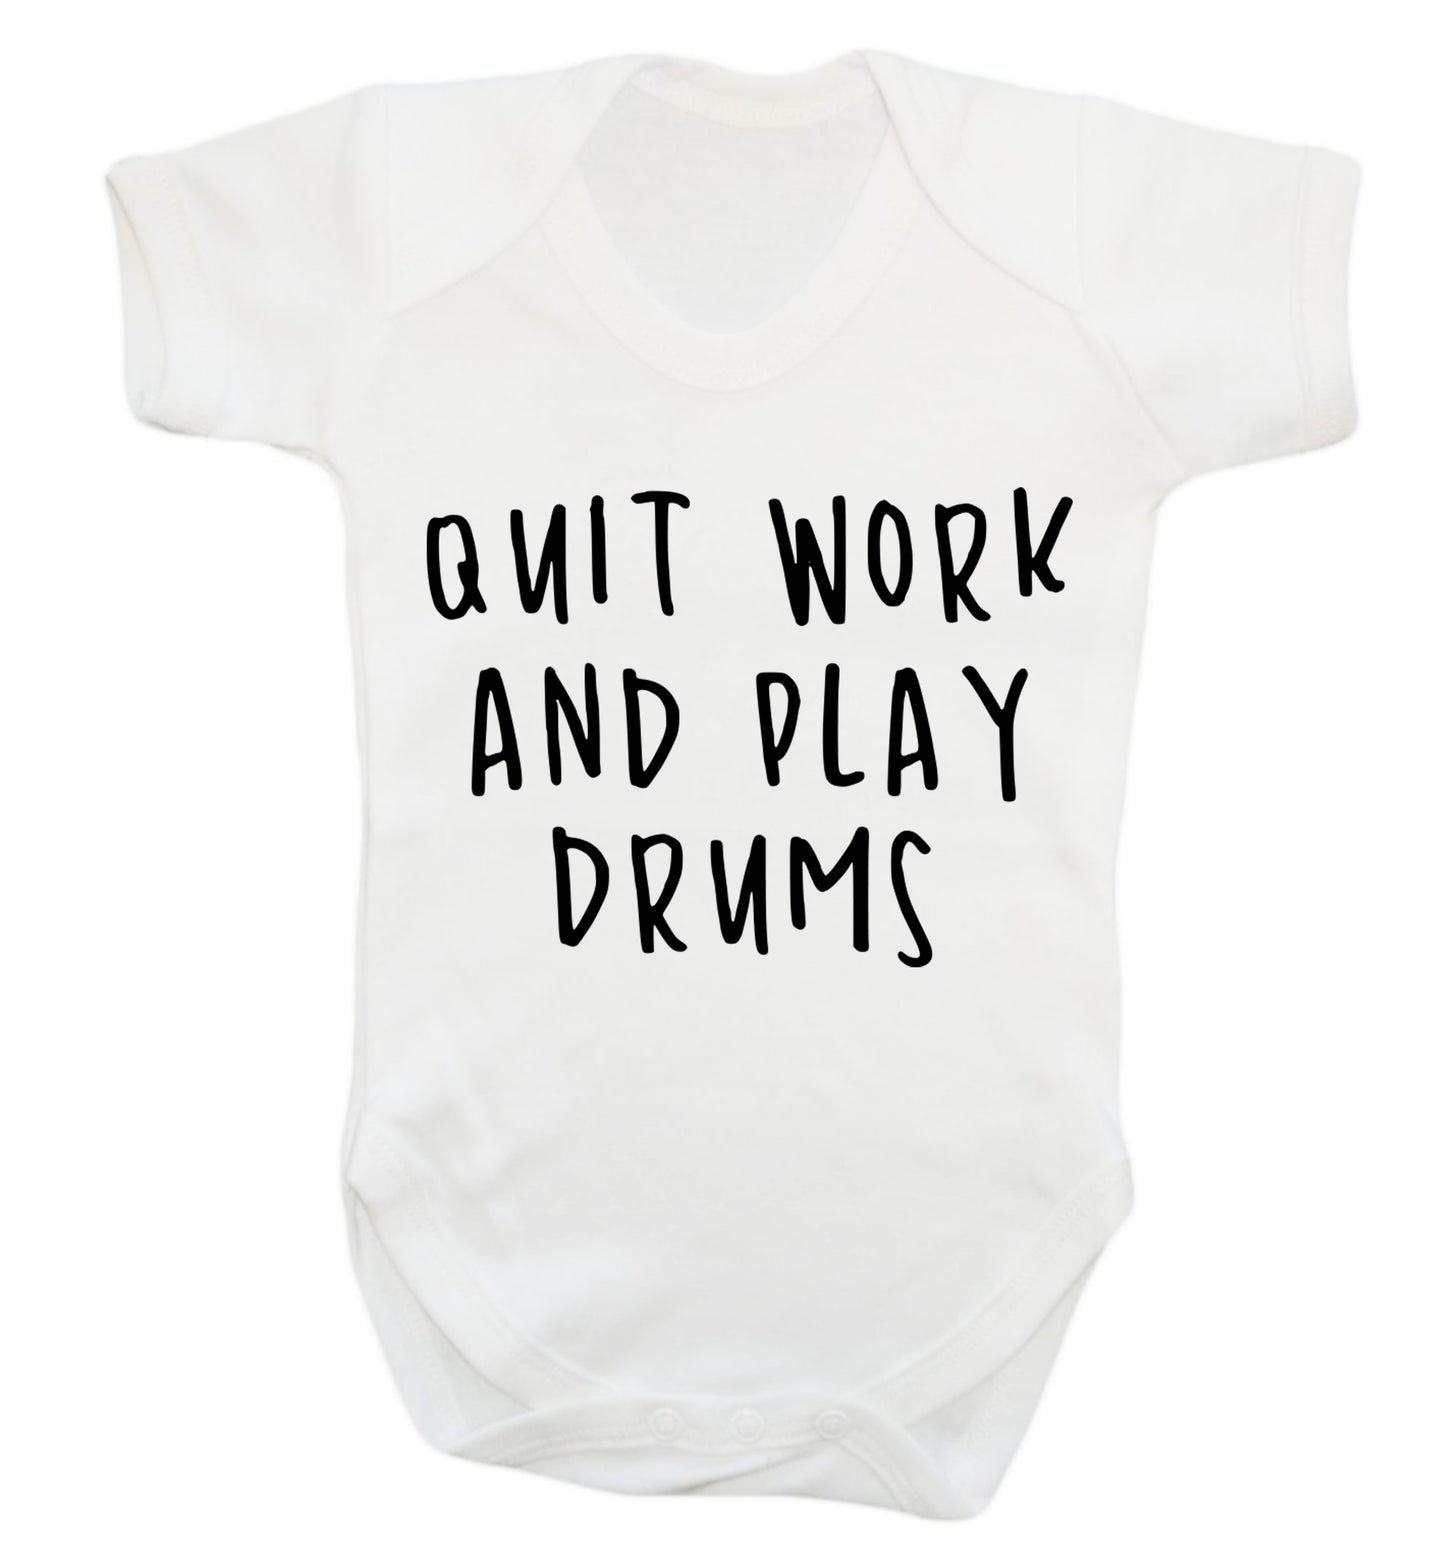 Quit work and play drums Baby Vest white 18-24 months